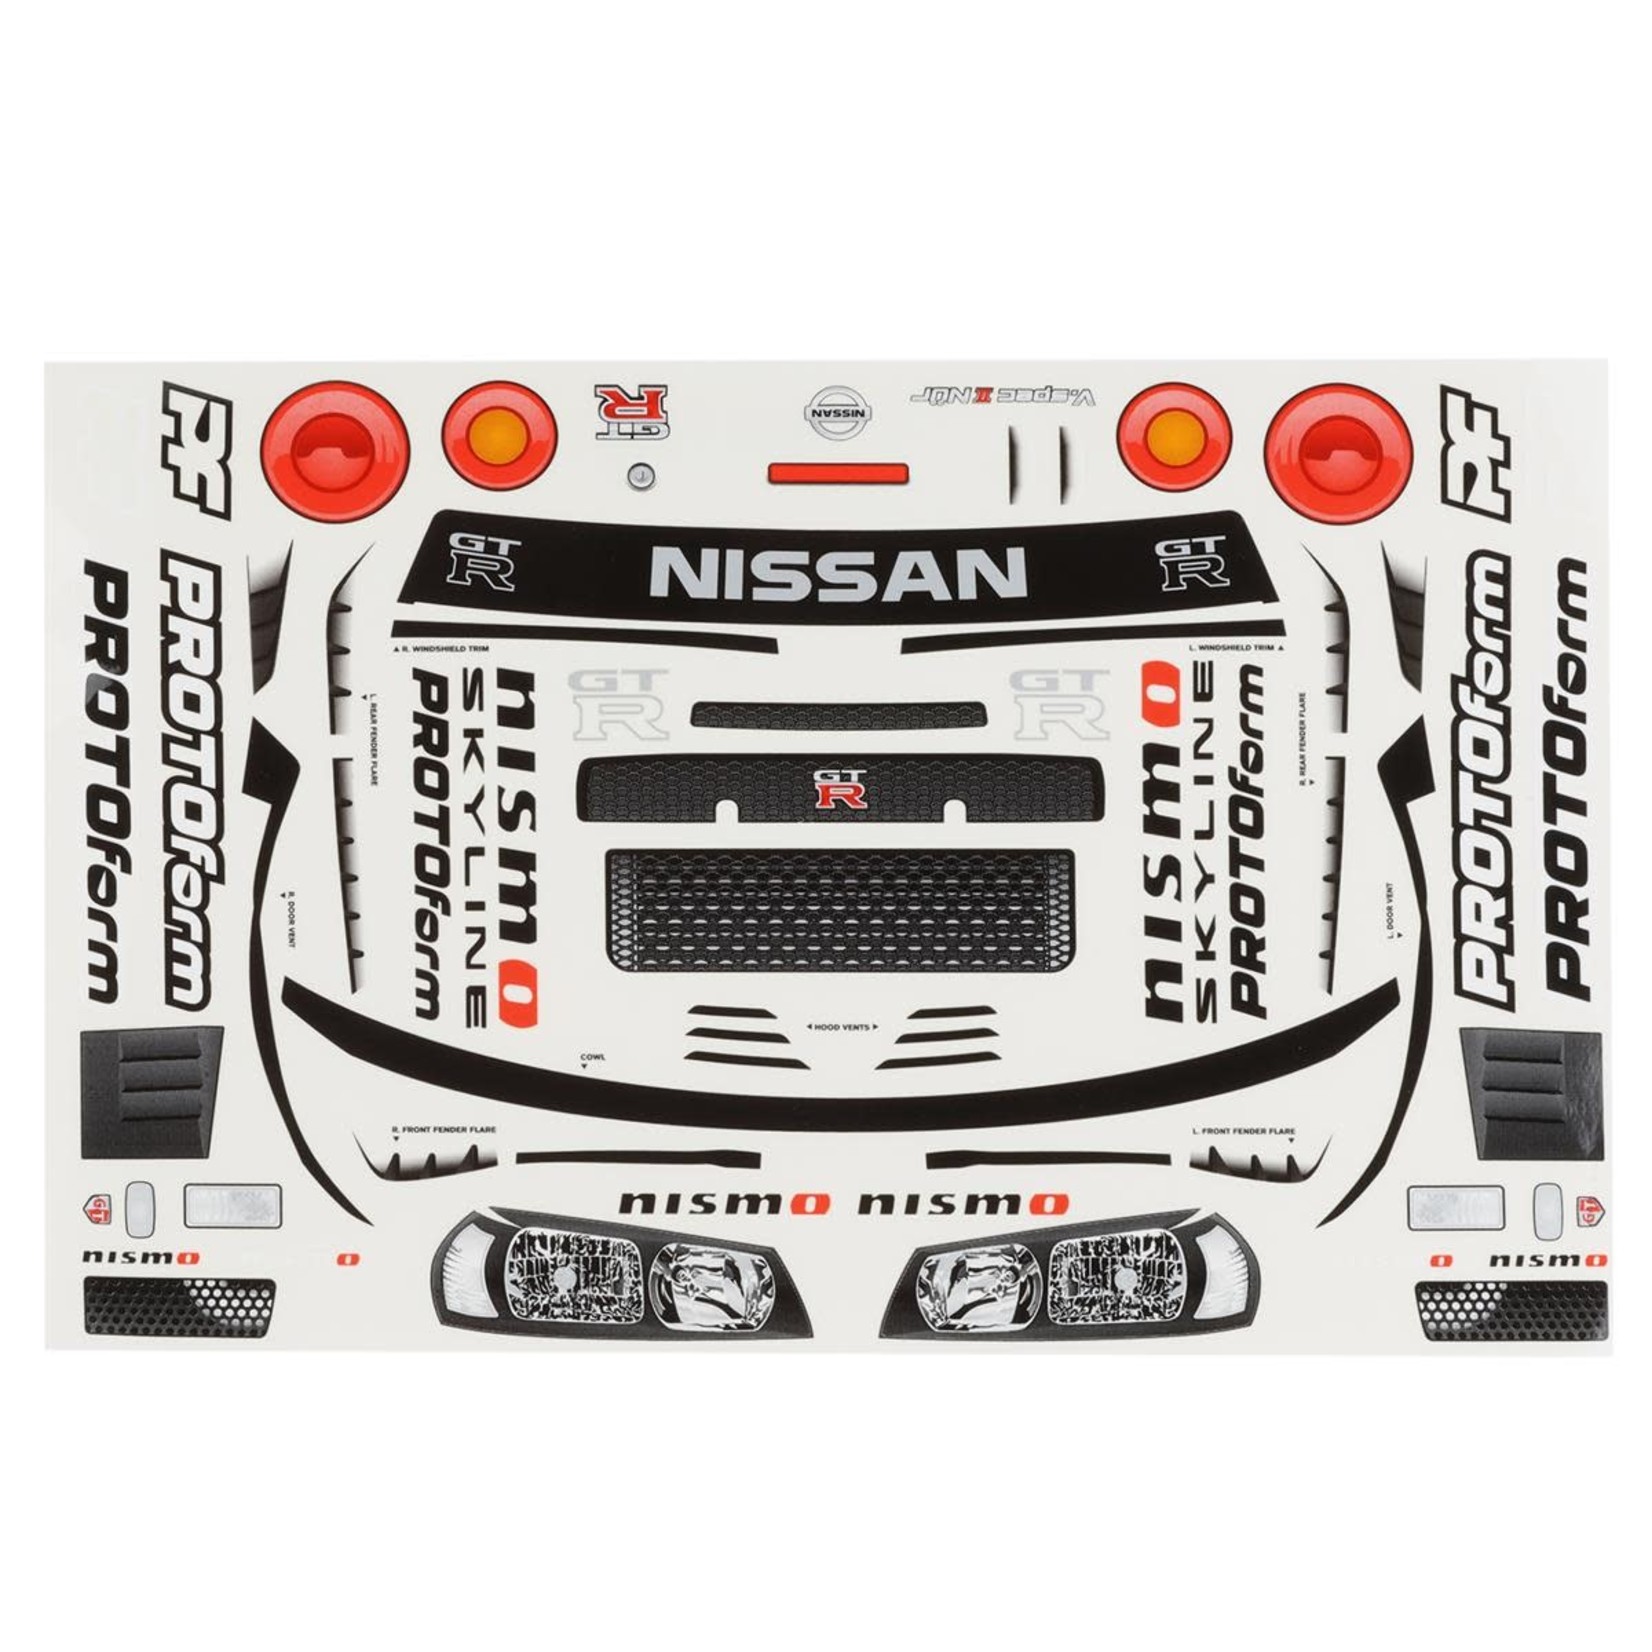 PROTOform Protoform 2002 Nissan Skyline GT-R R34 1/7 Touring Car Body (Clear) (Infraction 6S) #1584-00